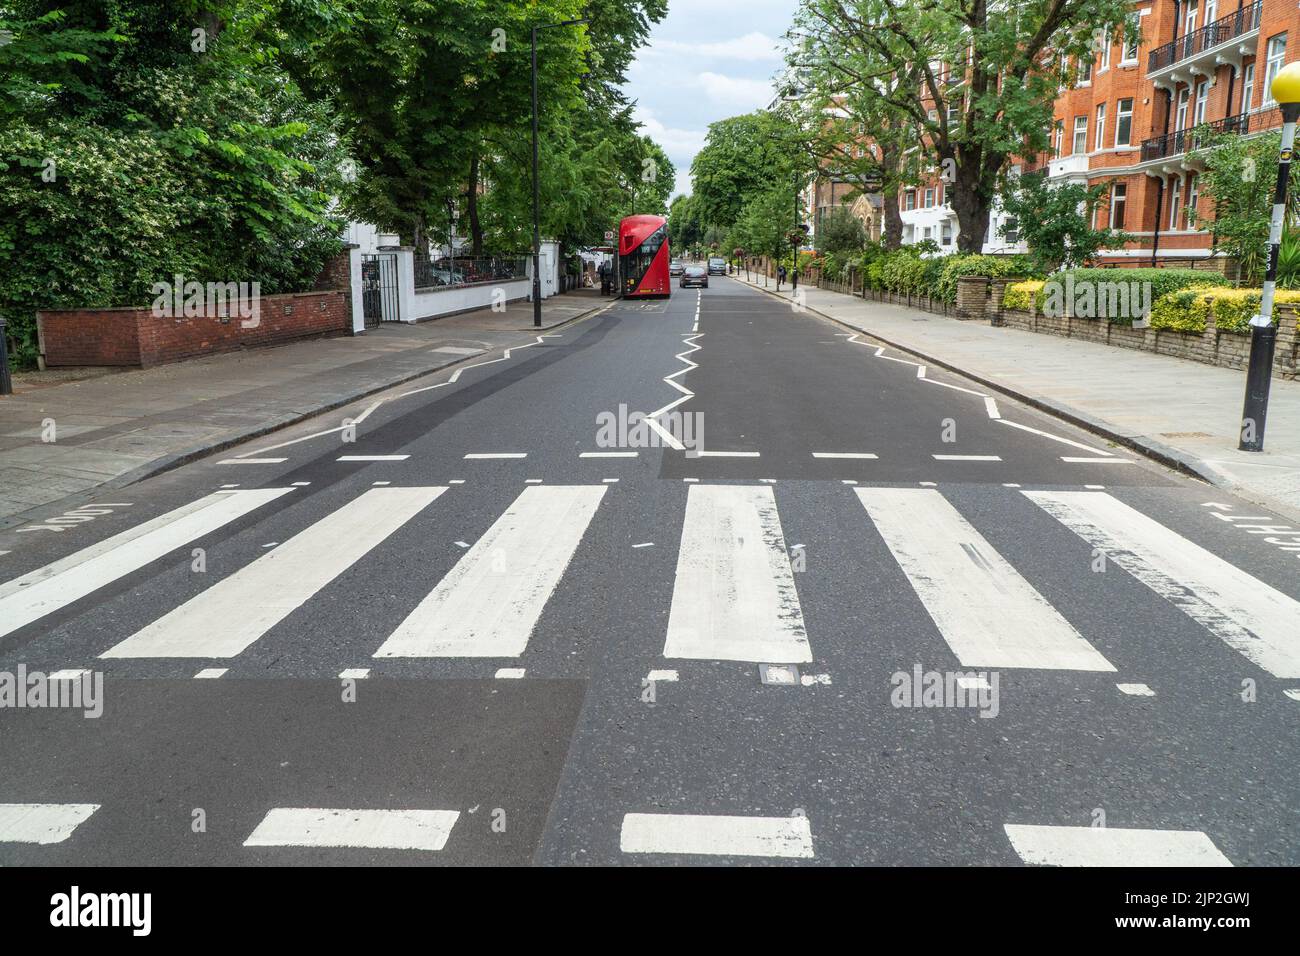 Abbey Road Zebra Crossing as used by the Beatles for their famous 1969 Album cover 'Abbey Road' Stock Photo